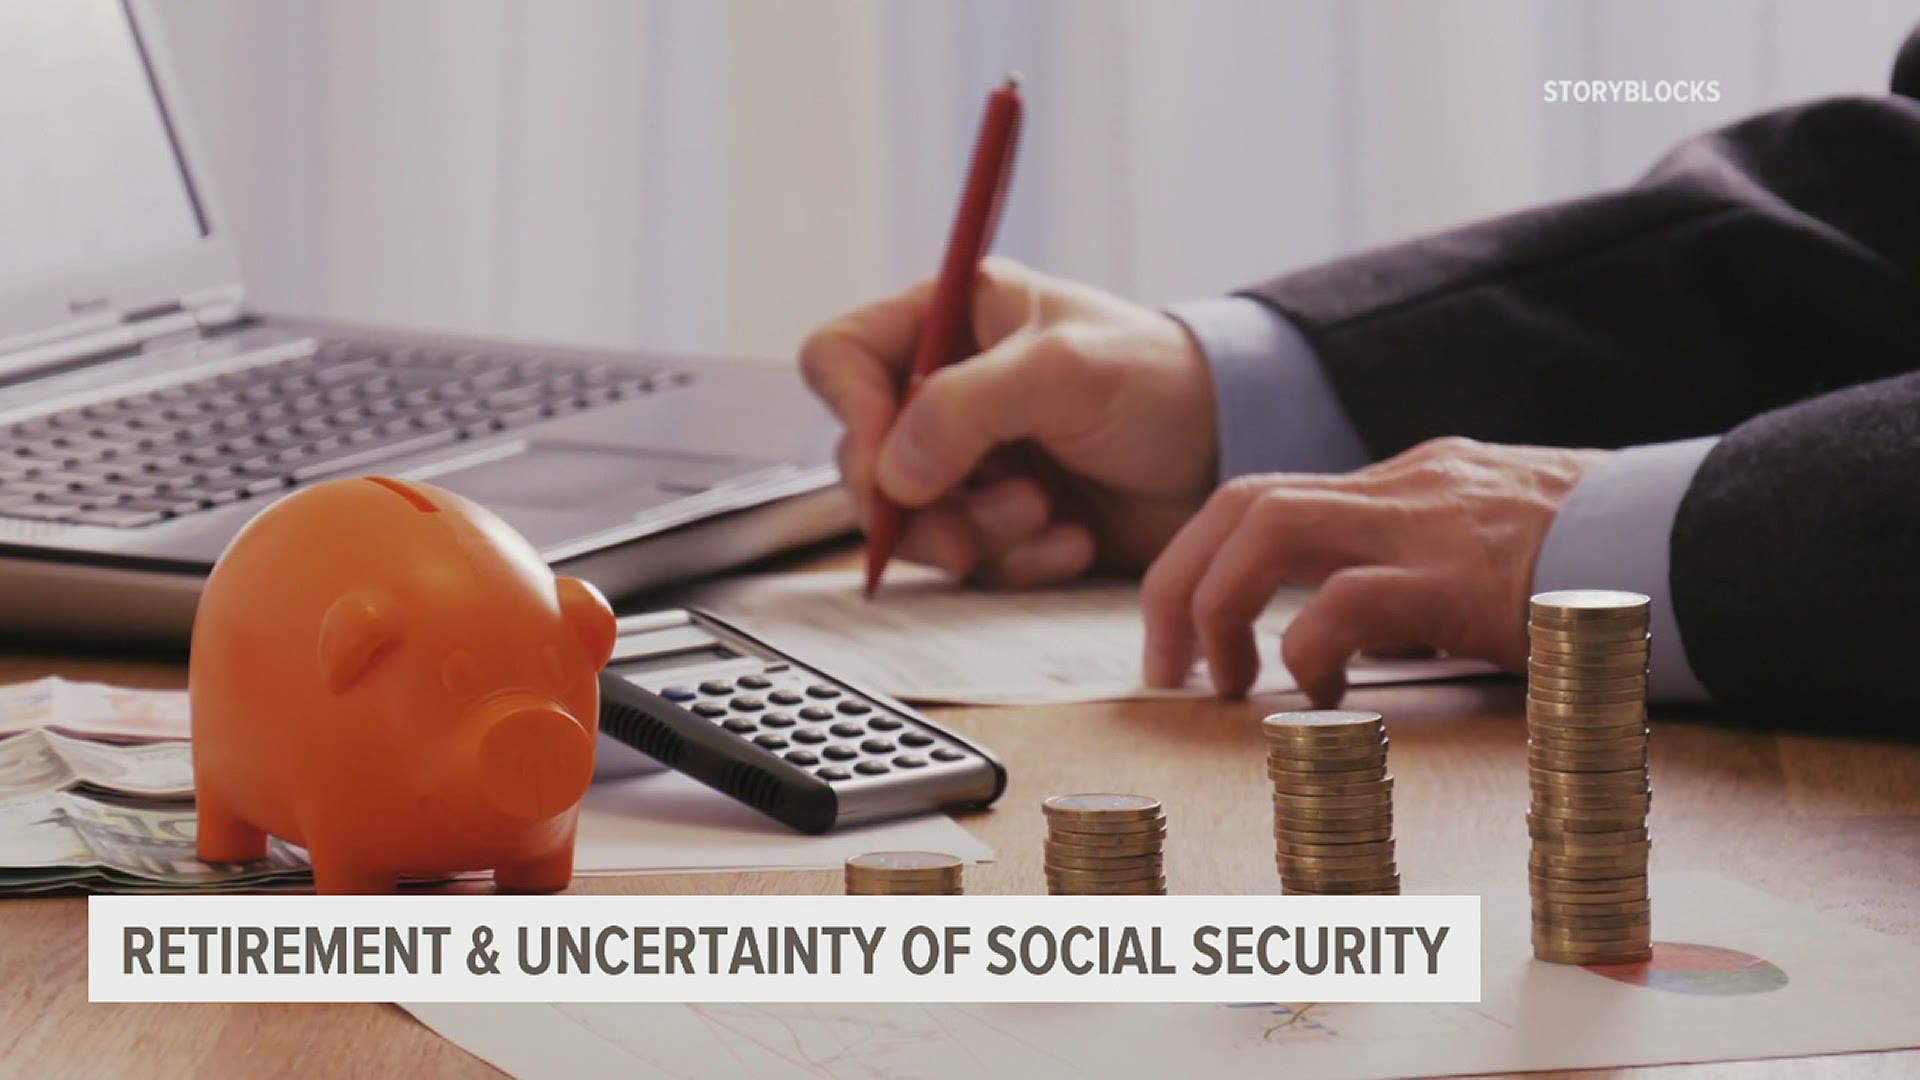 With Social Security expected to be depleted by 2035, a financial expert has tips on how to prepare for retirement without the extra benefits.